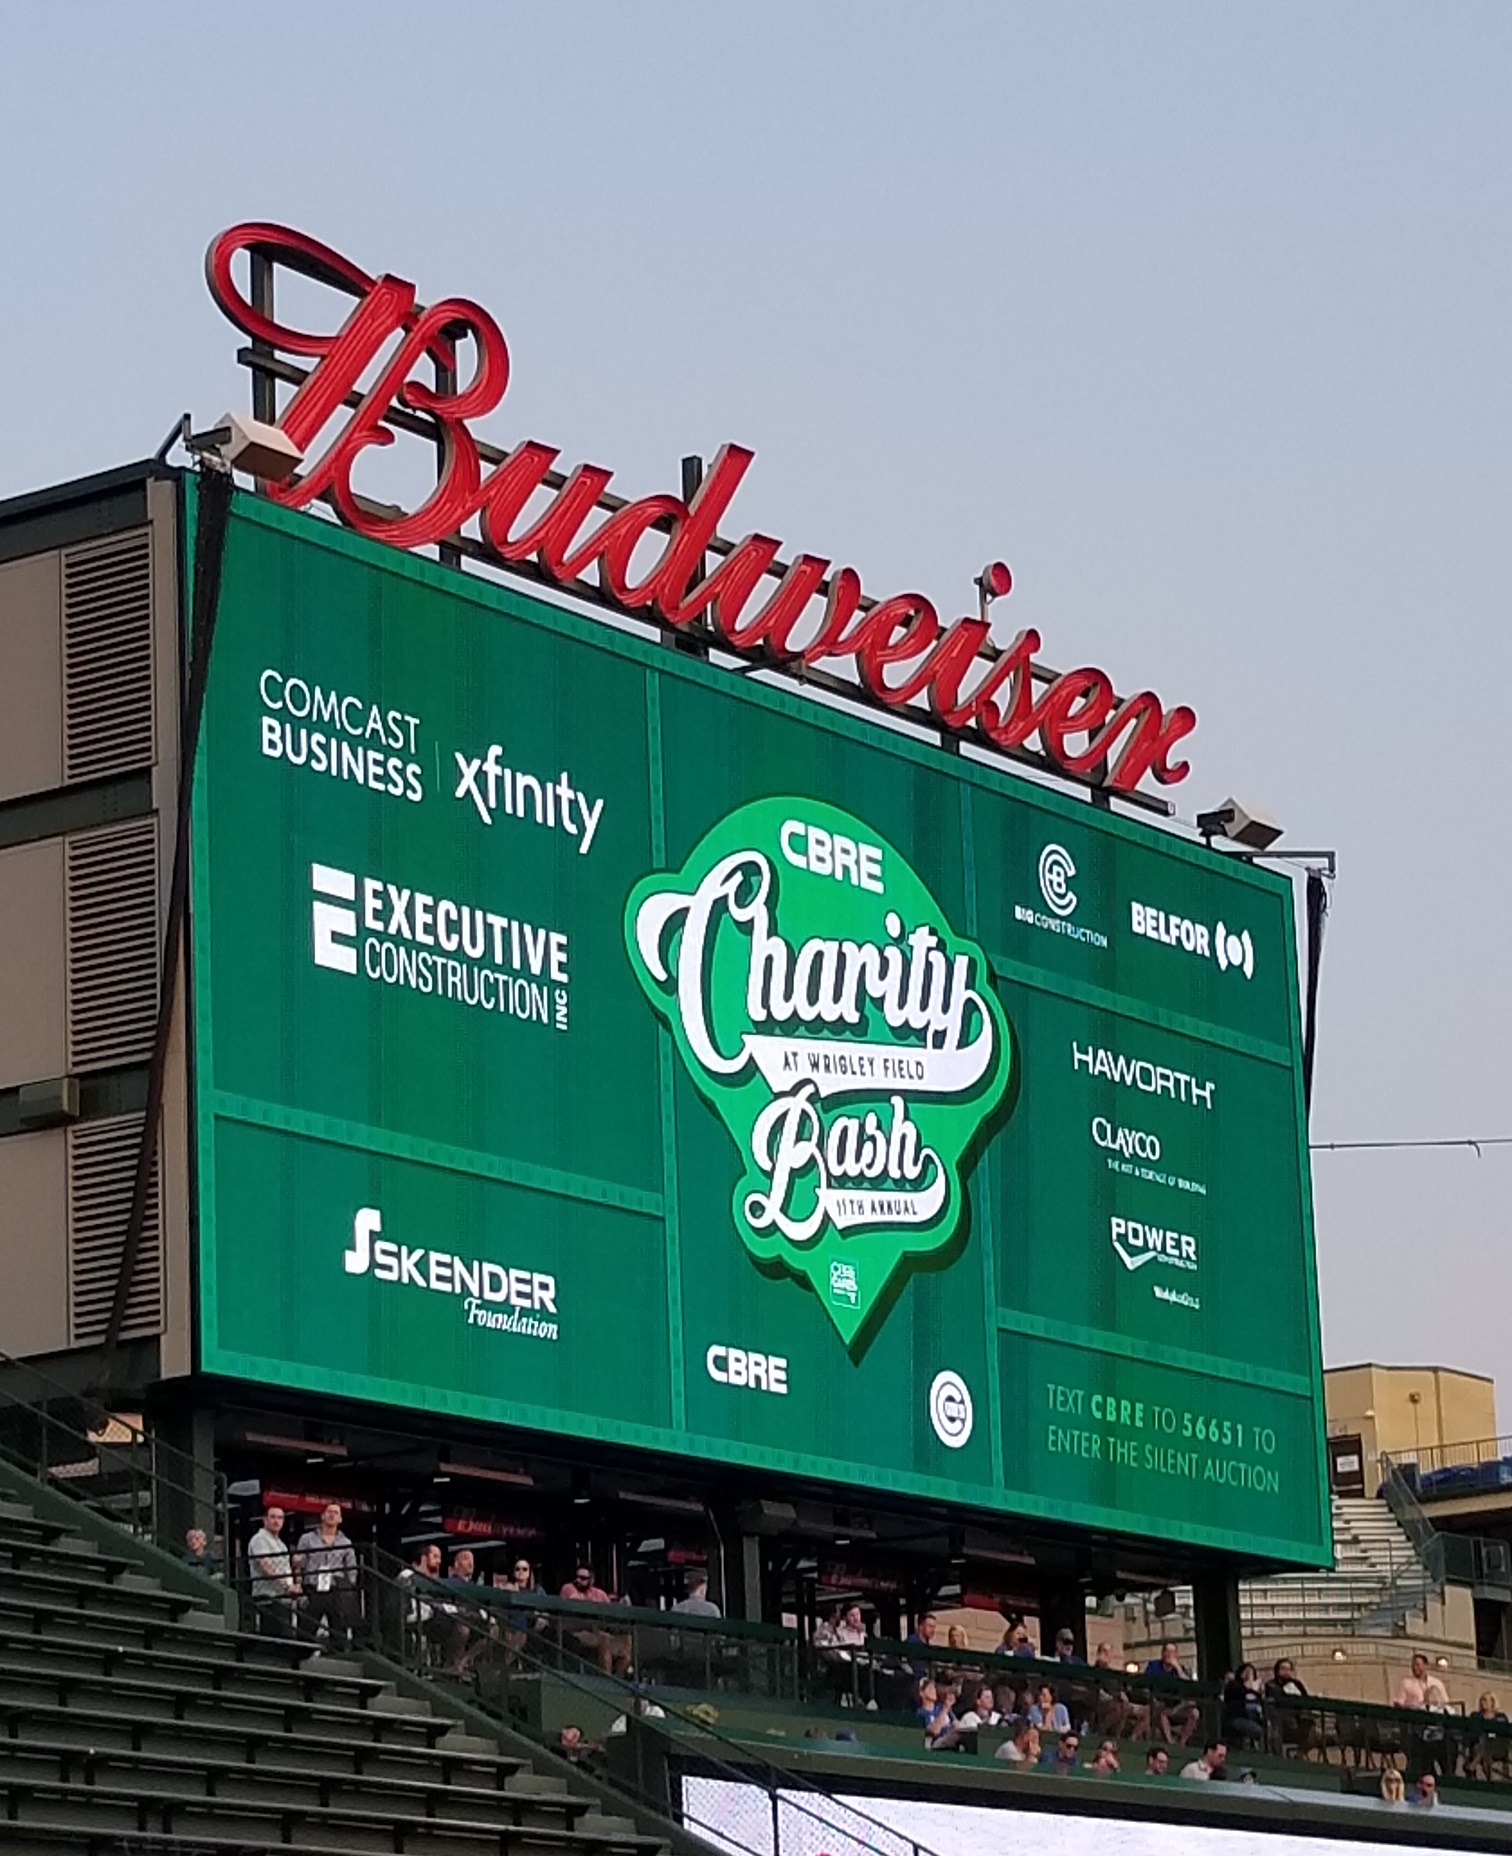 IMC attended the 2019 CBRE Charity Bash at Wrigley Field.